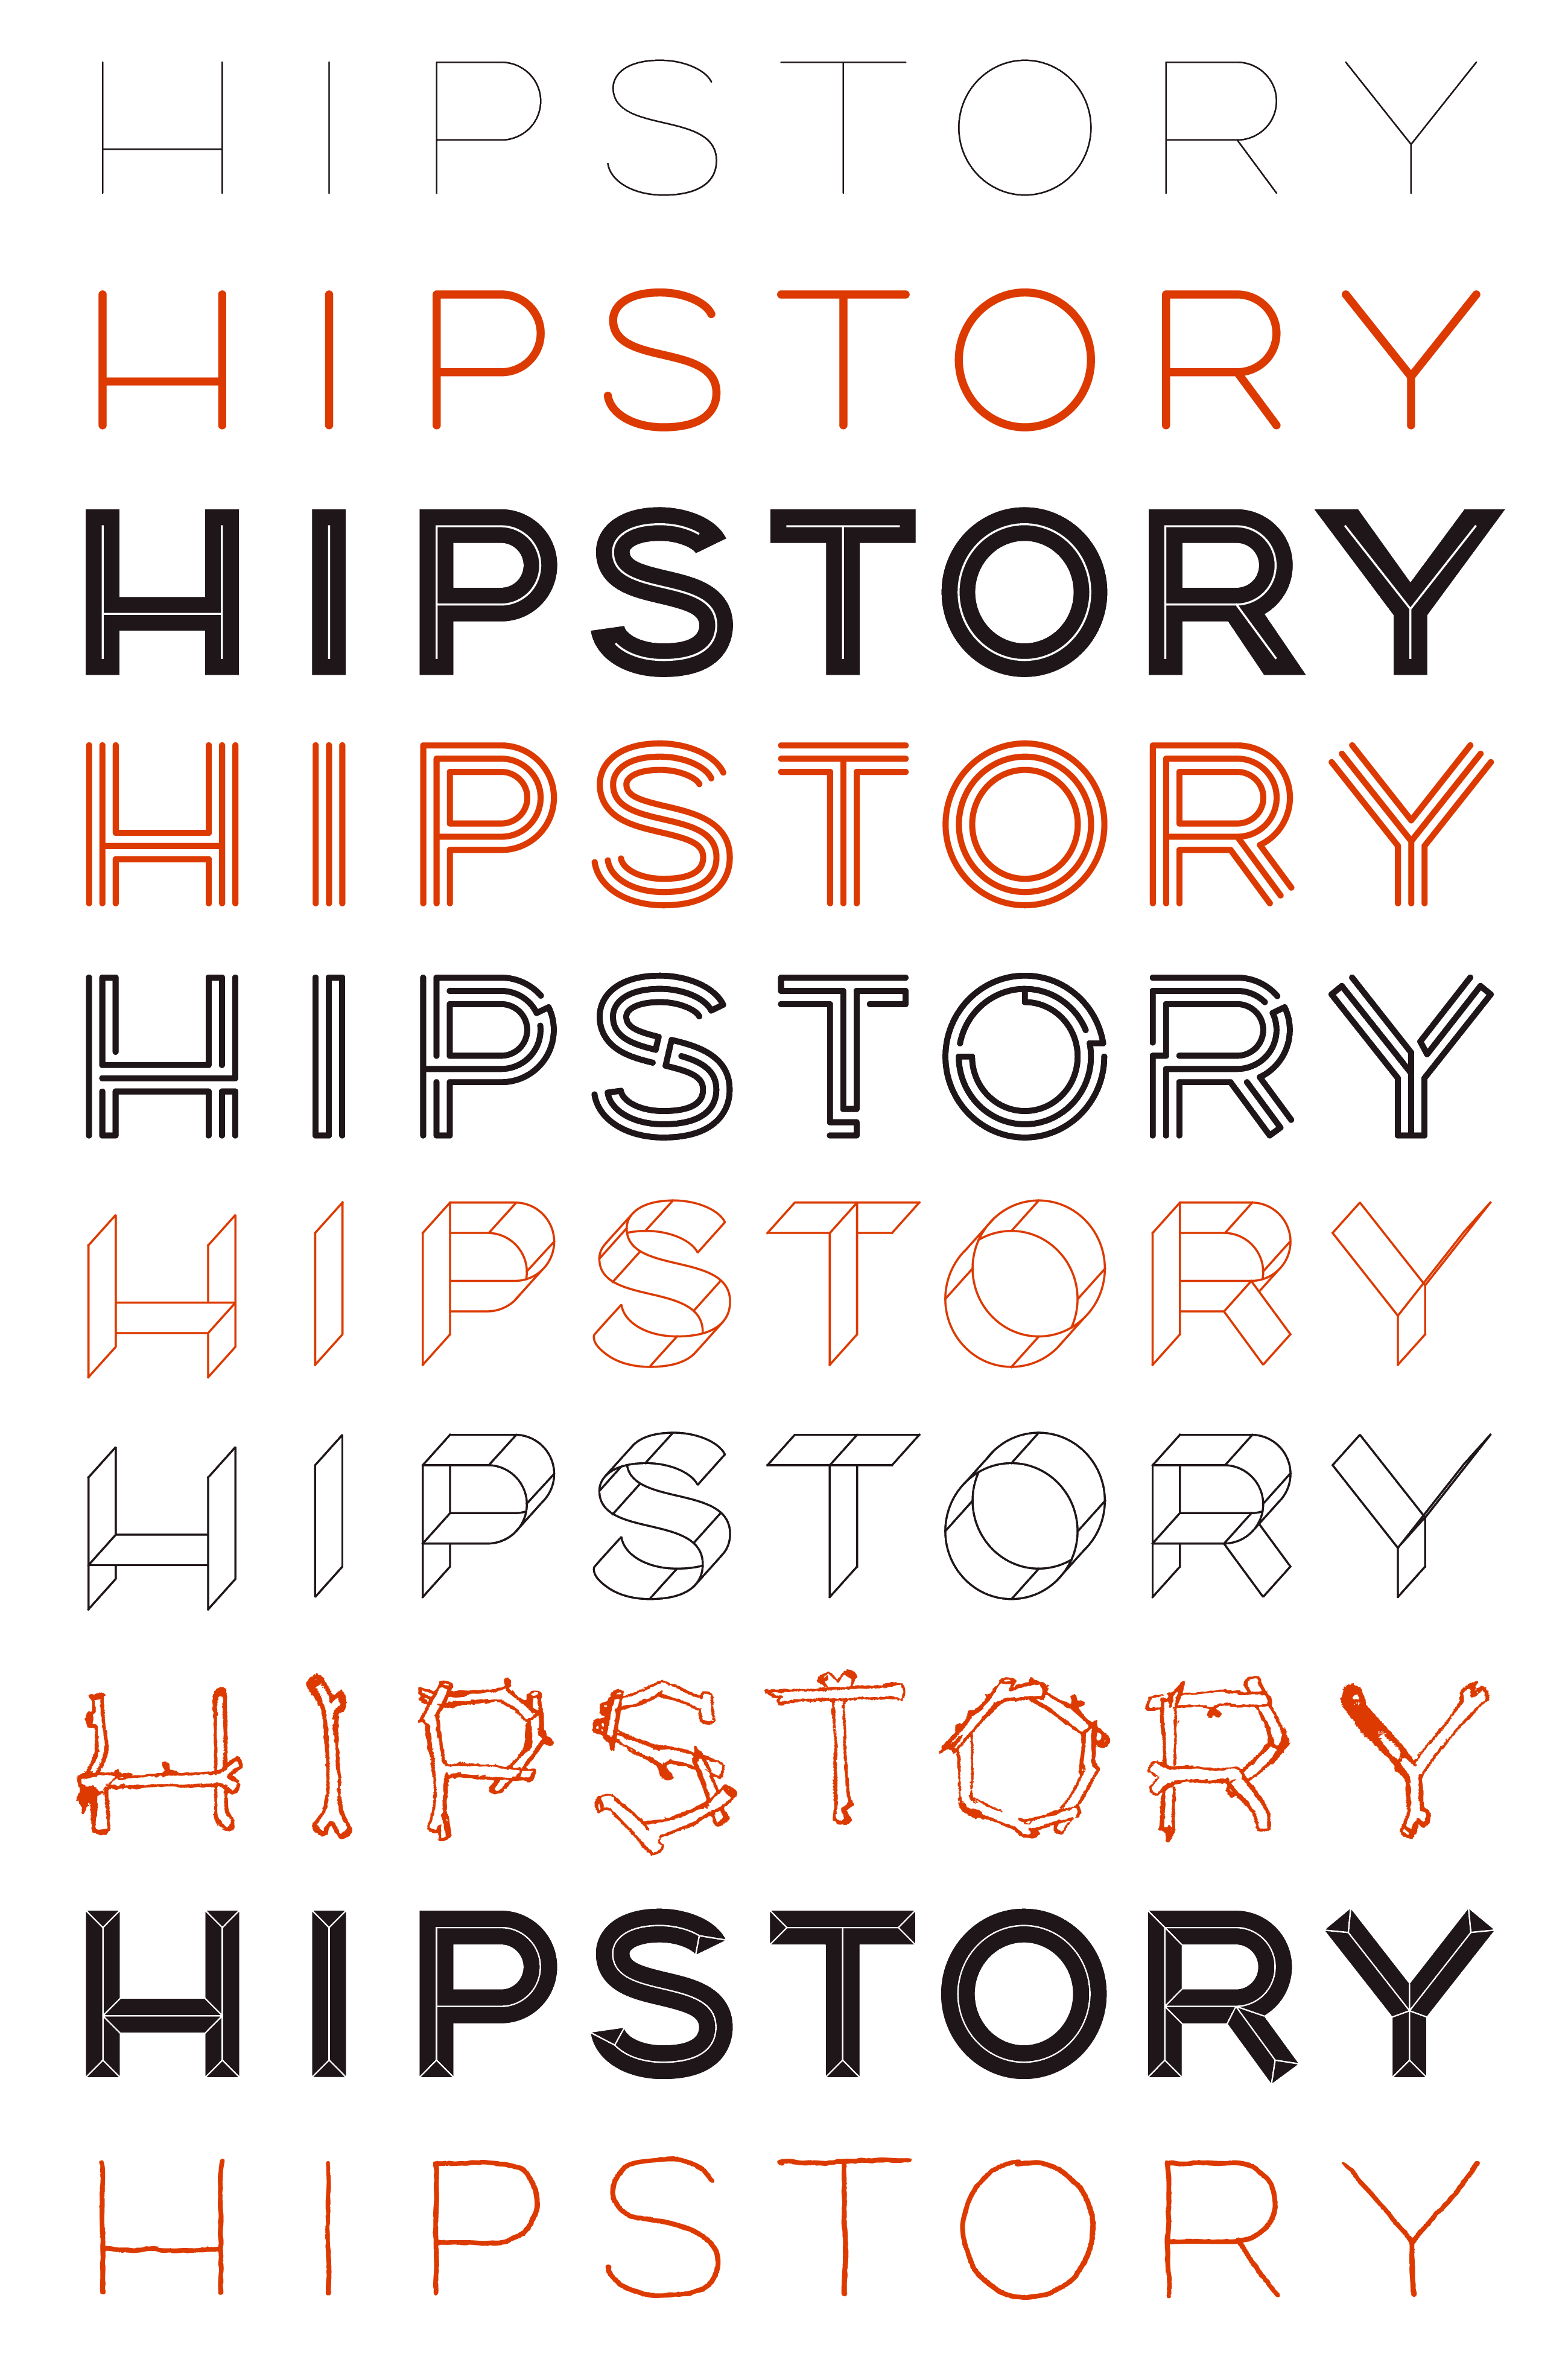 Initial layer drawings for Hipstory | After making more layers and glyphs, the typeface will be ready for release. On its website, artists and designers are invited to submit layers to the collection.